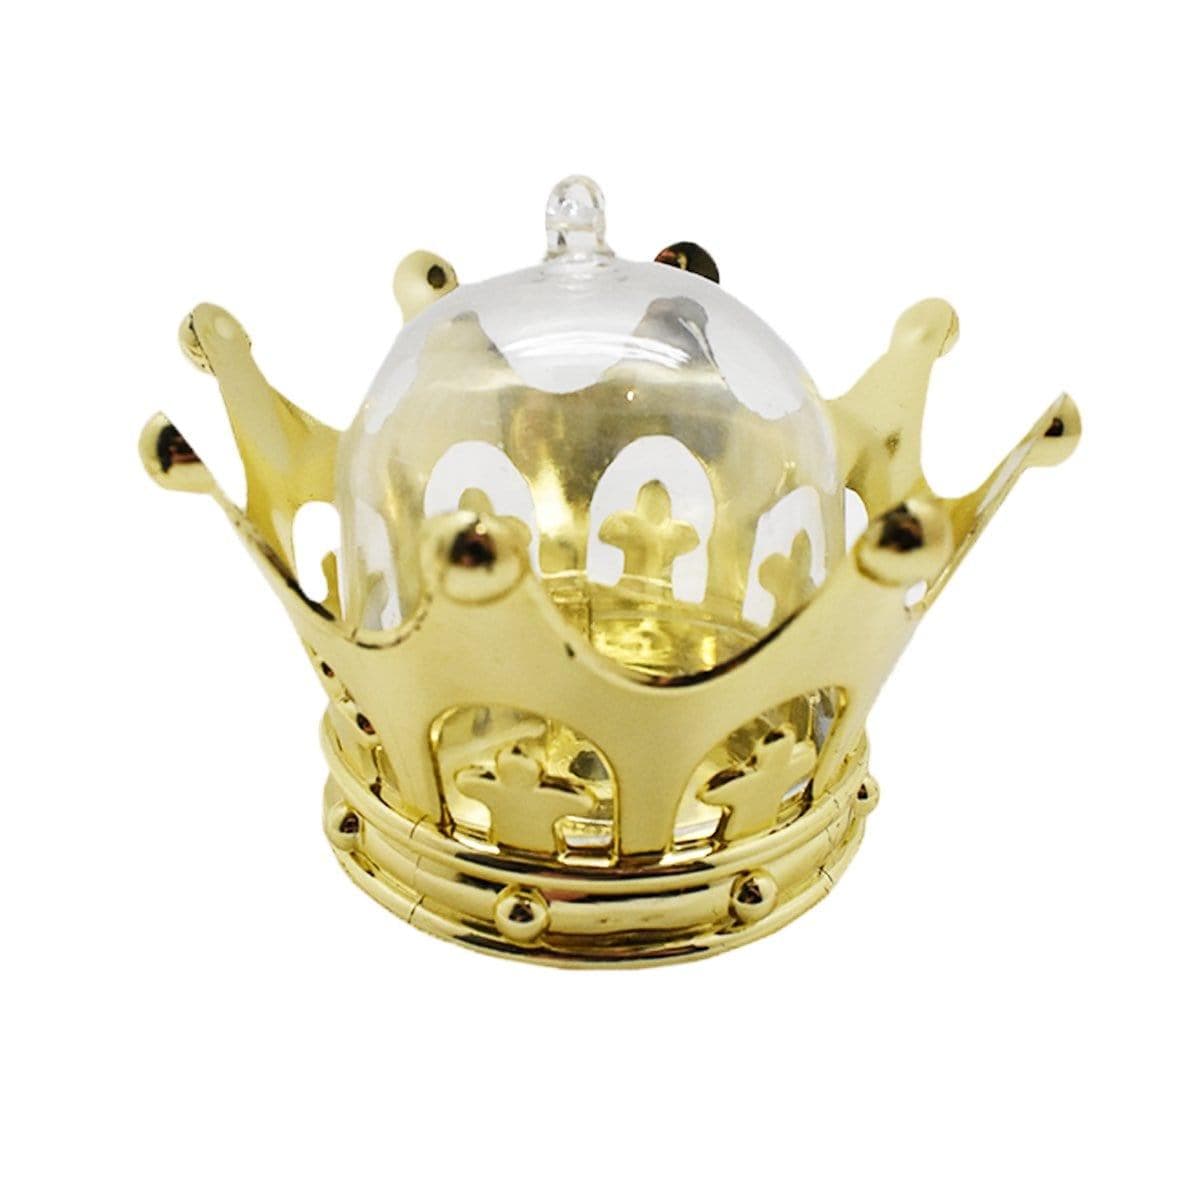 Buy Baby Shower Gold royal crown containers, 12 per package sold at Party Expert